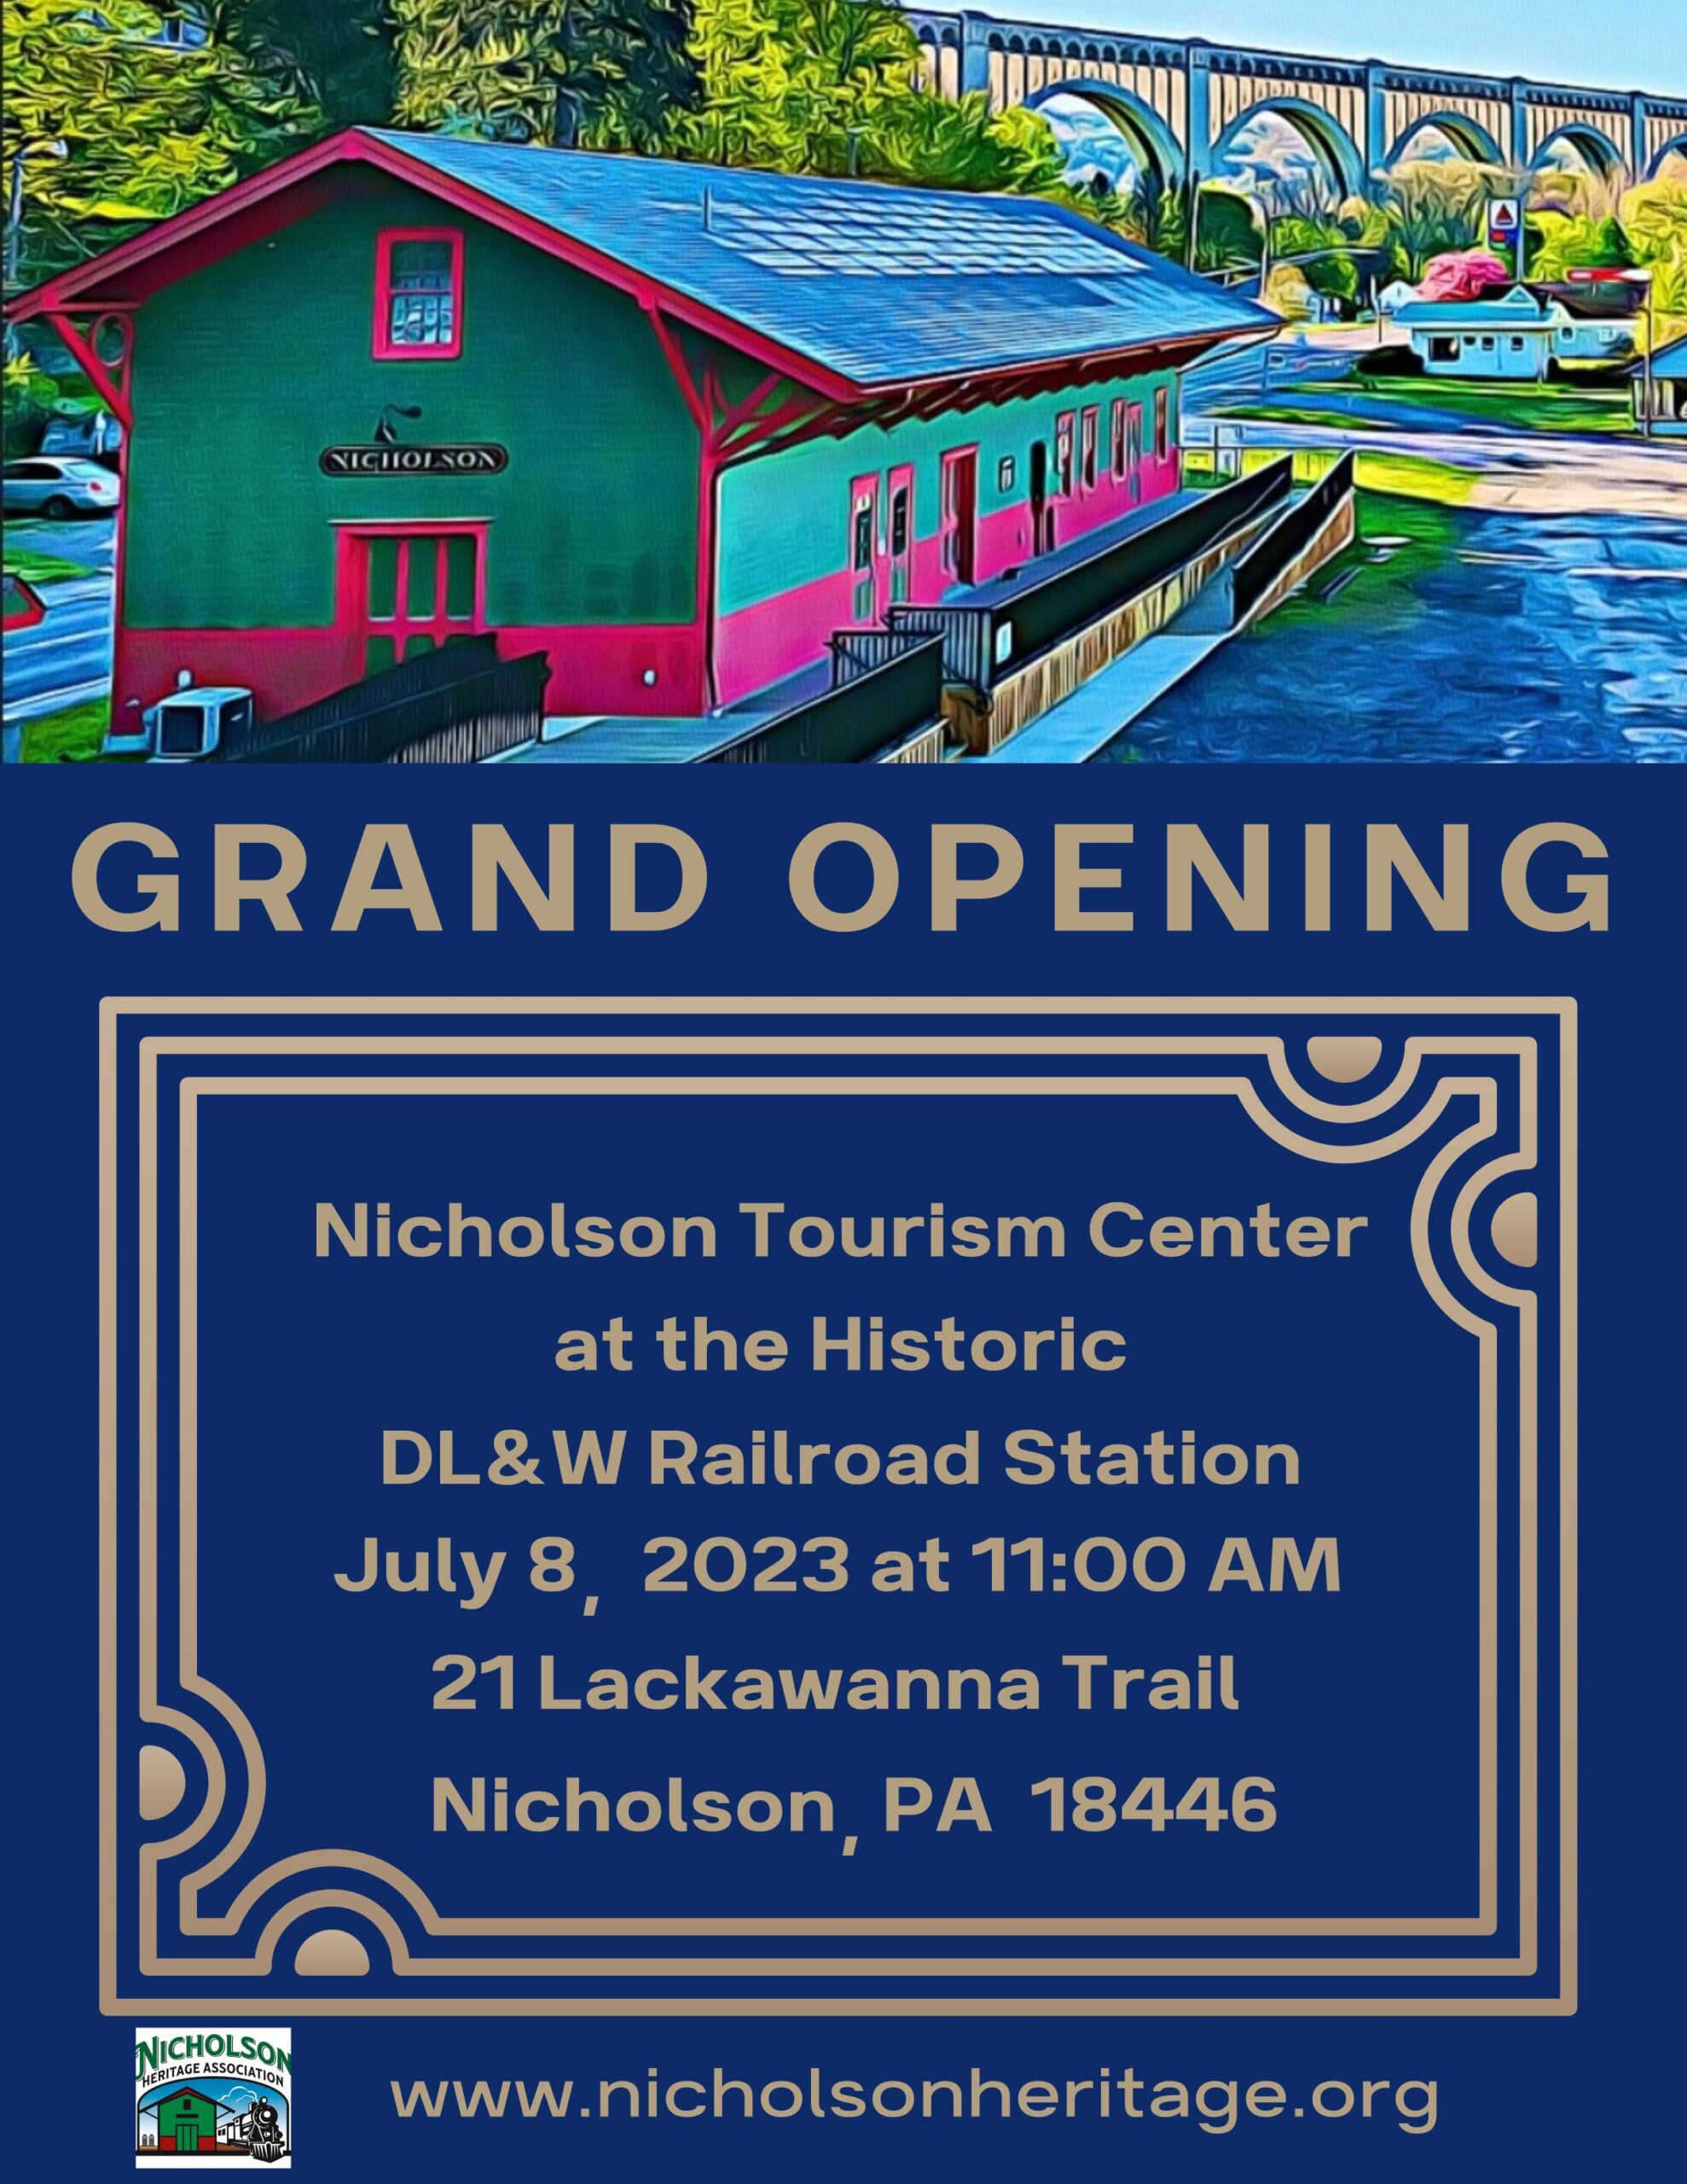 Nicholson Tourism Center at the Historic DL&W Railroad Station Grand Opening - July 8-2023 - 11 am